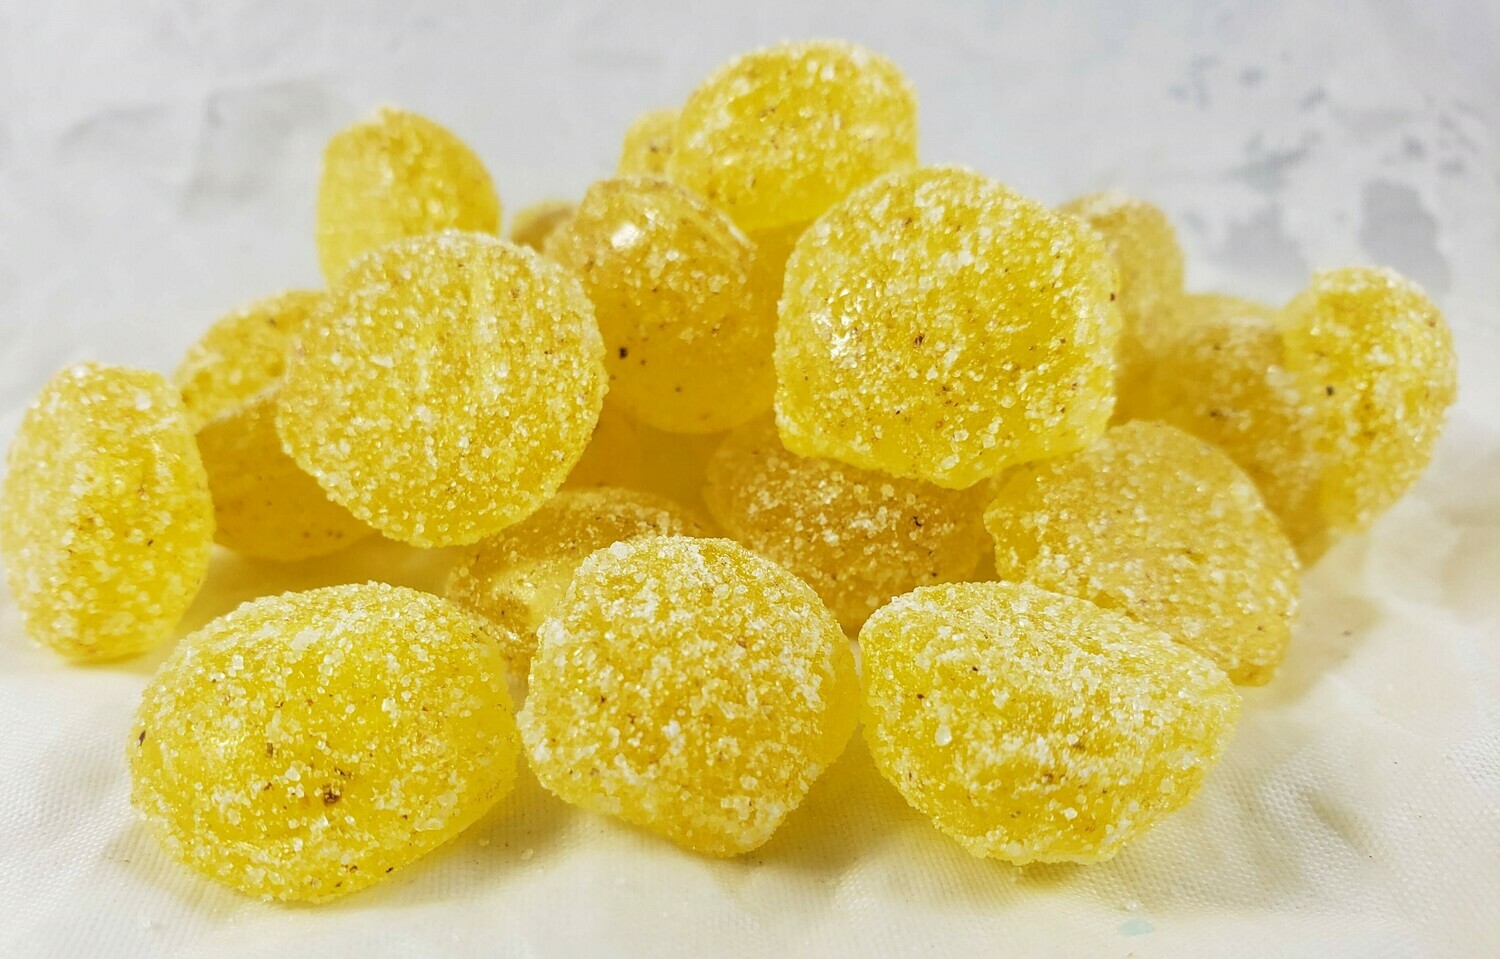 Pineapple Reaper Spicy Hard Candy Drops, 4.5 ounces